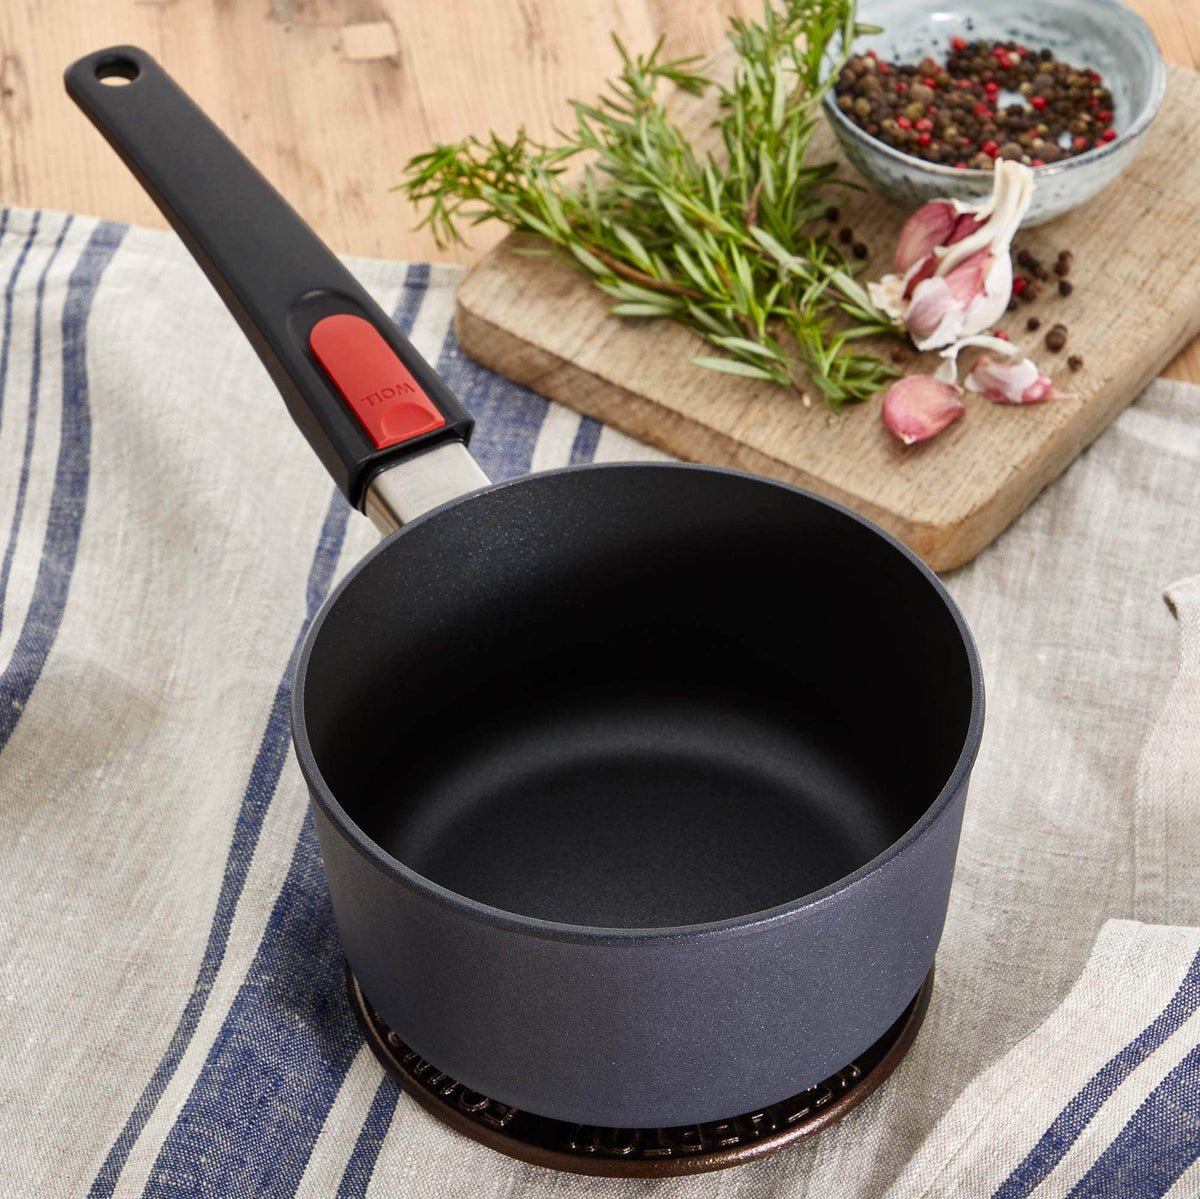 The best saucepan for use with range cookers. Oven &amp; dishwasher safe!